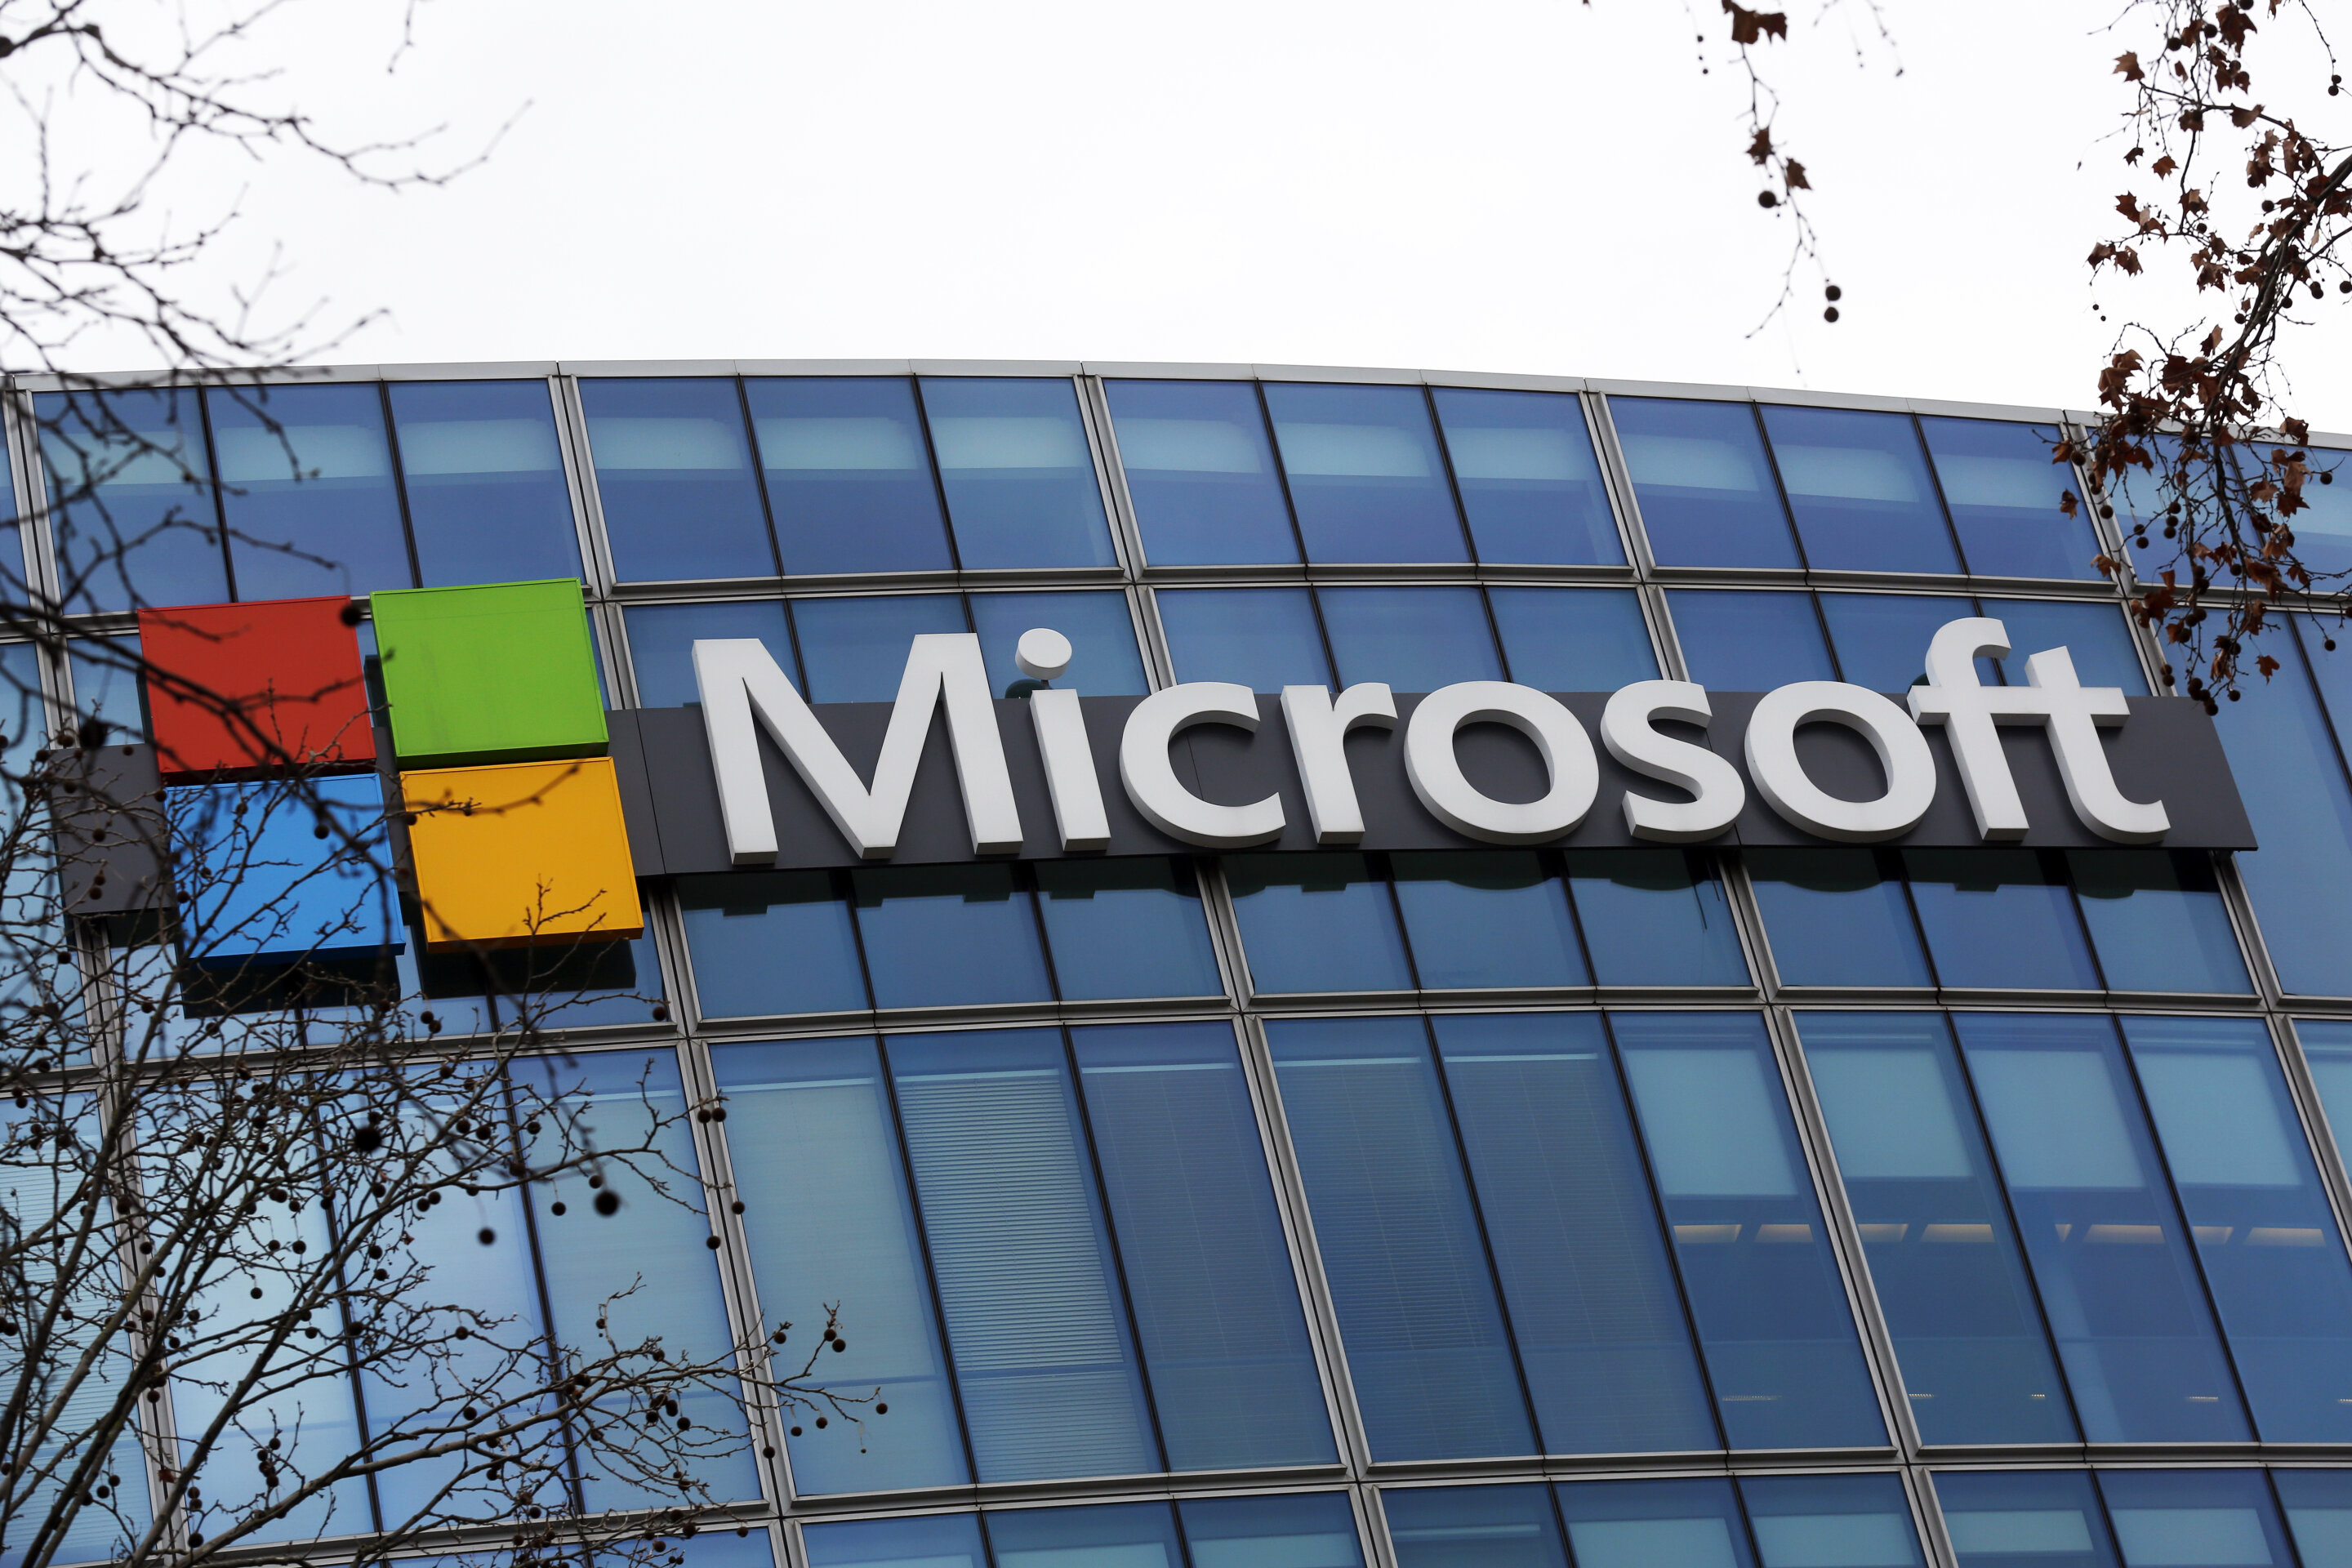 #Video game workers form Microsoft’s first US labor union